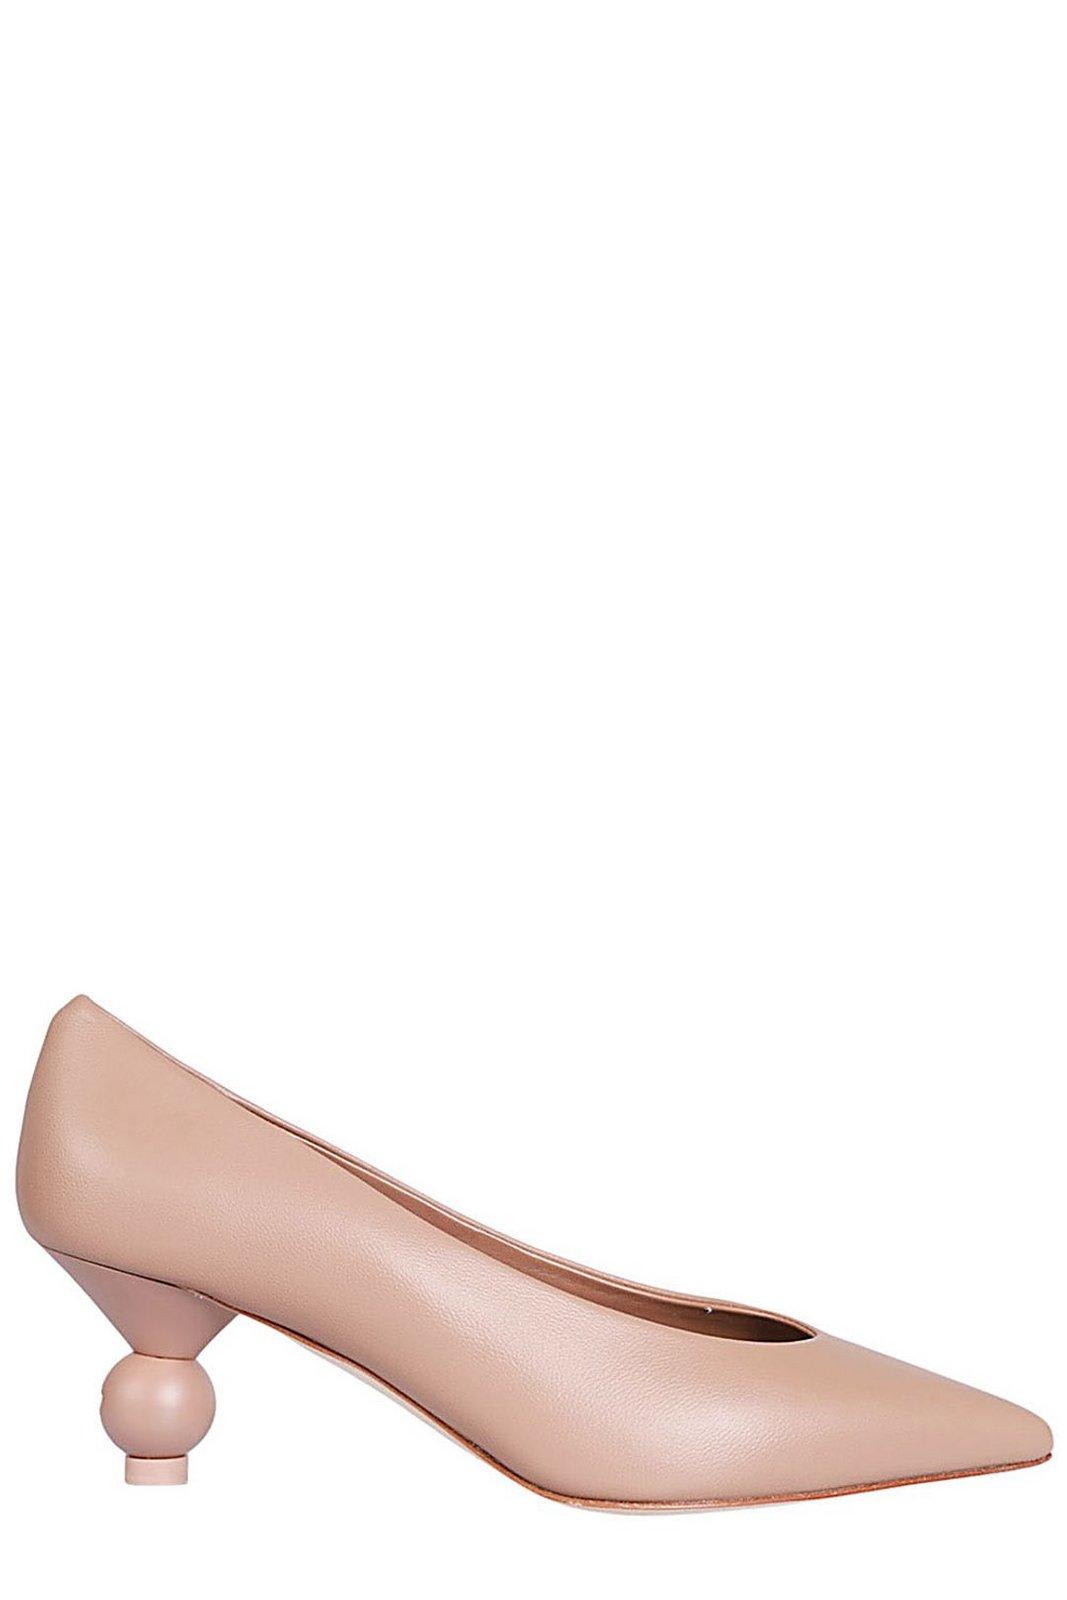 Weekend Max Mara Pointed Toe Slip-on Pumps In White